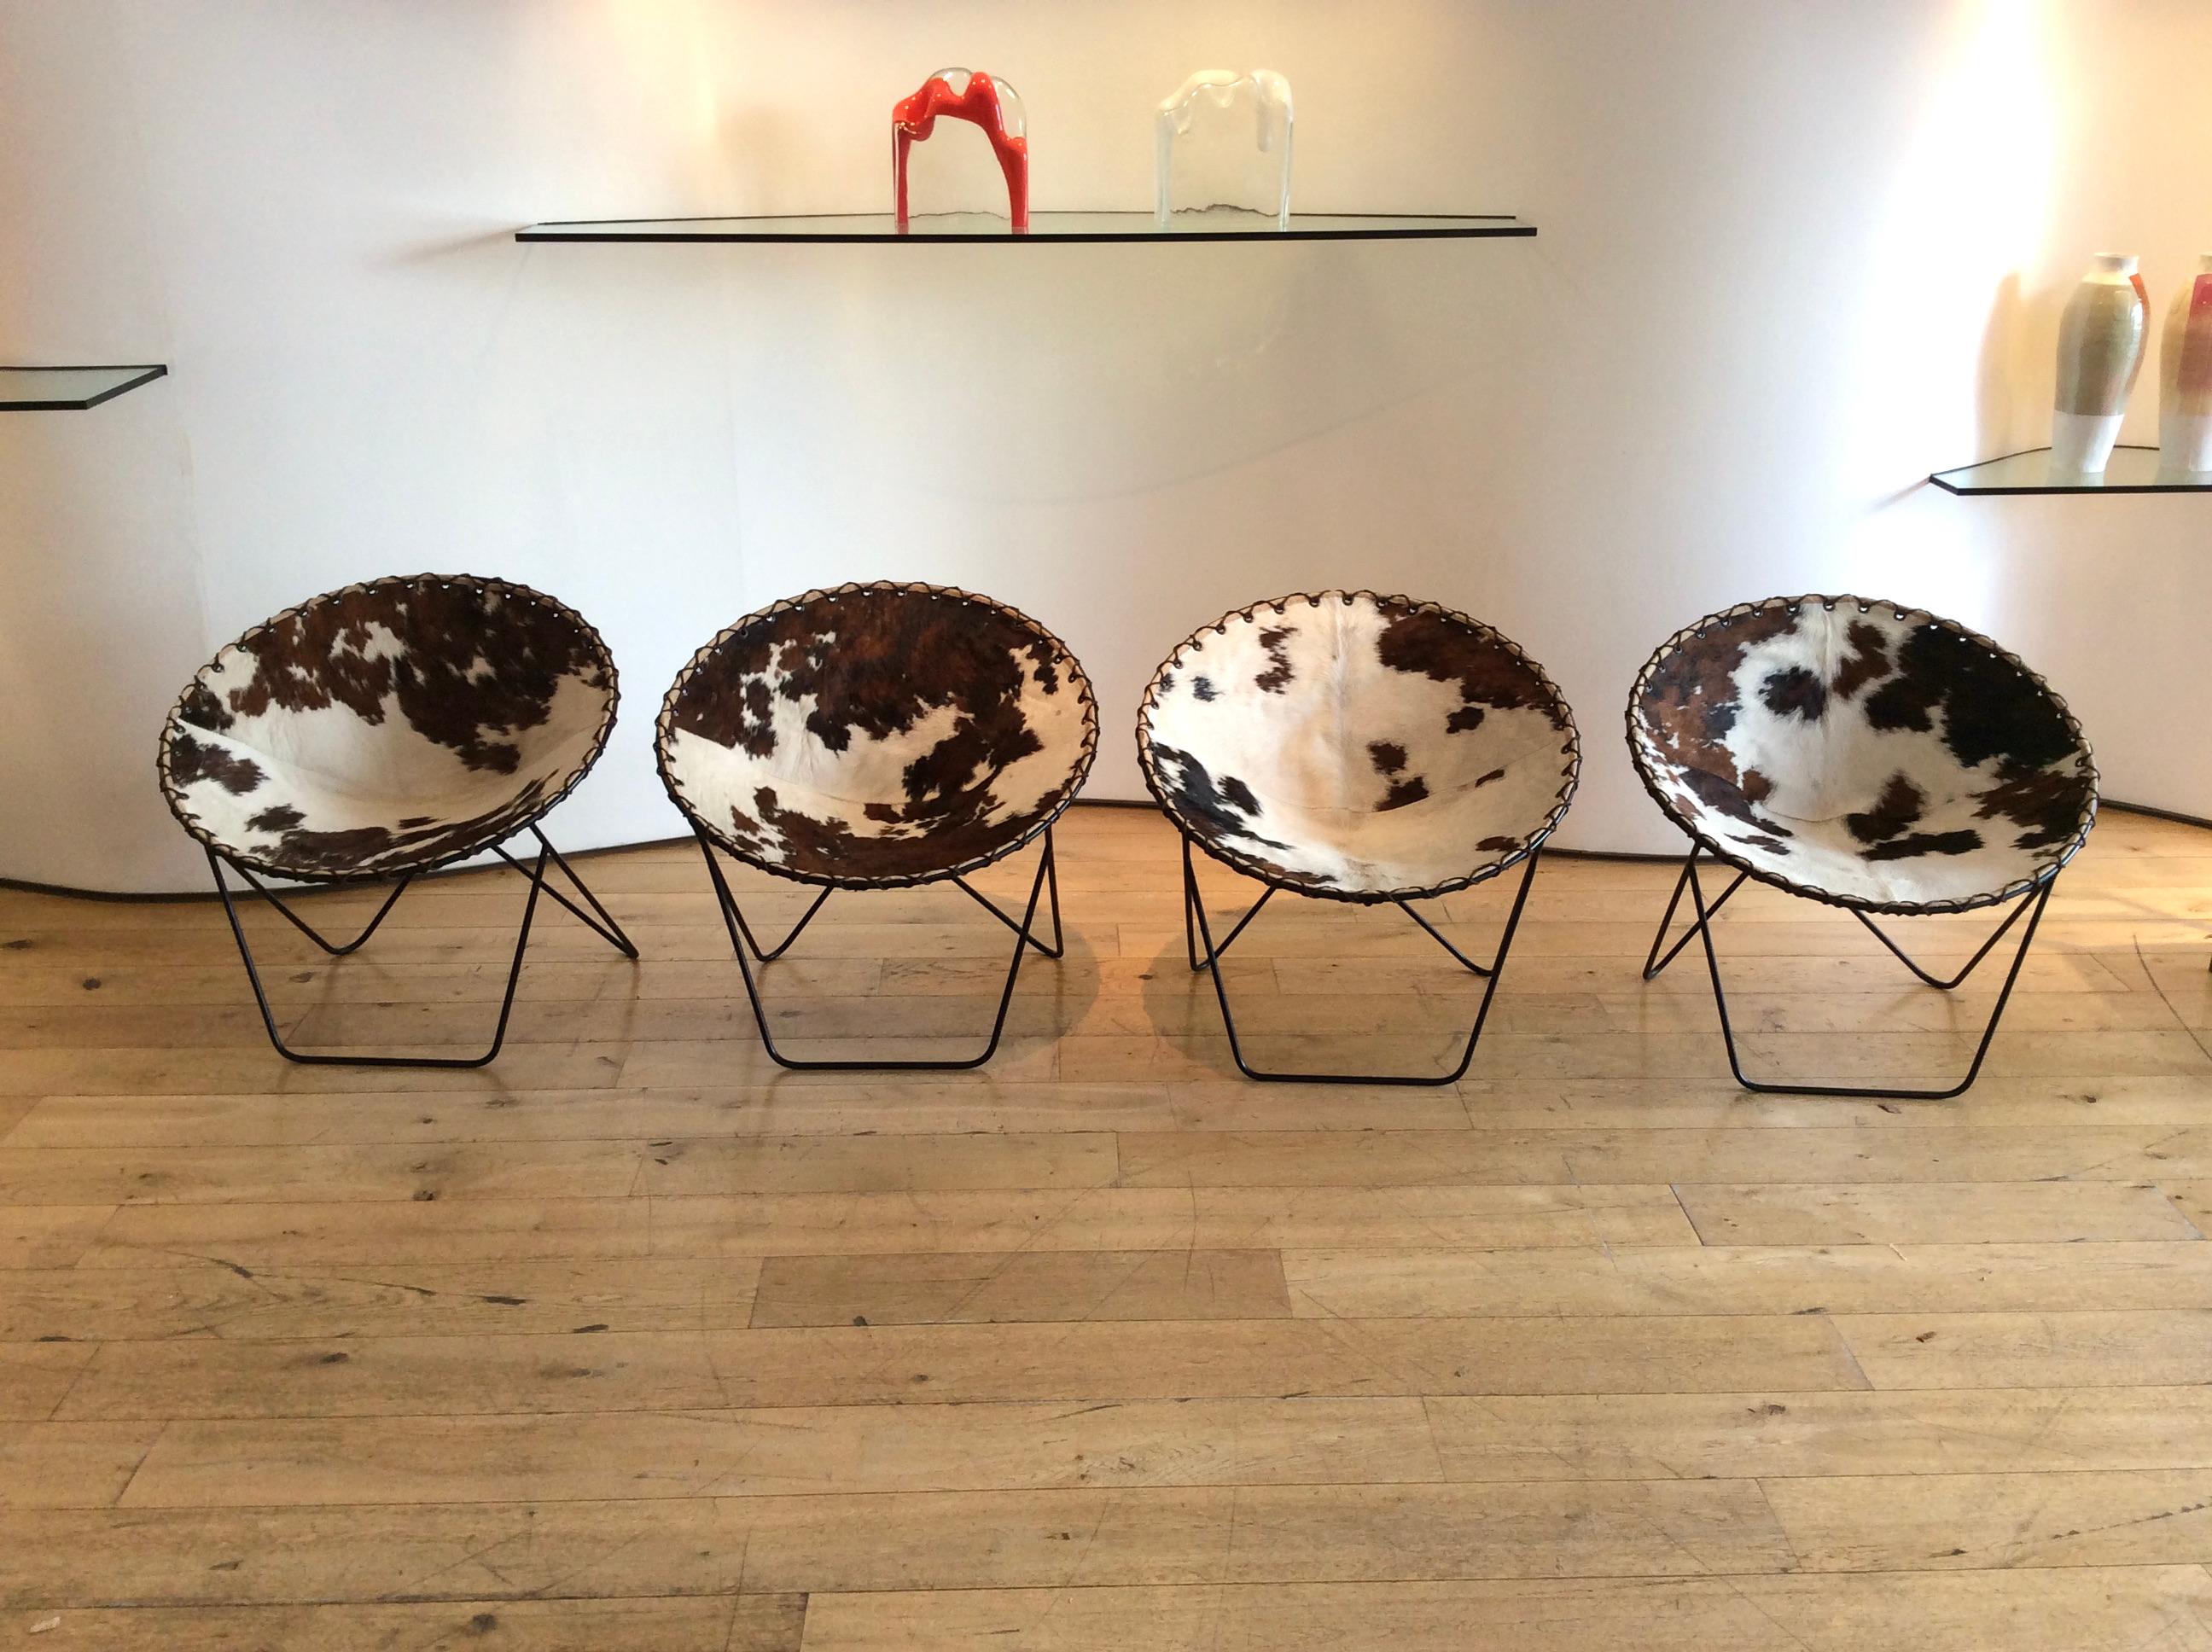 Charming set of 4 circular chairs in cowhide, perfect for relaxed seating.
Metal legs with cowhide seats edged with grommets whip-stitched to metal frame.